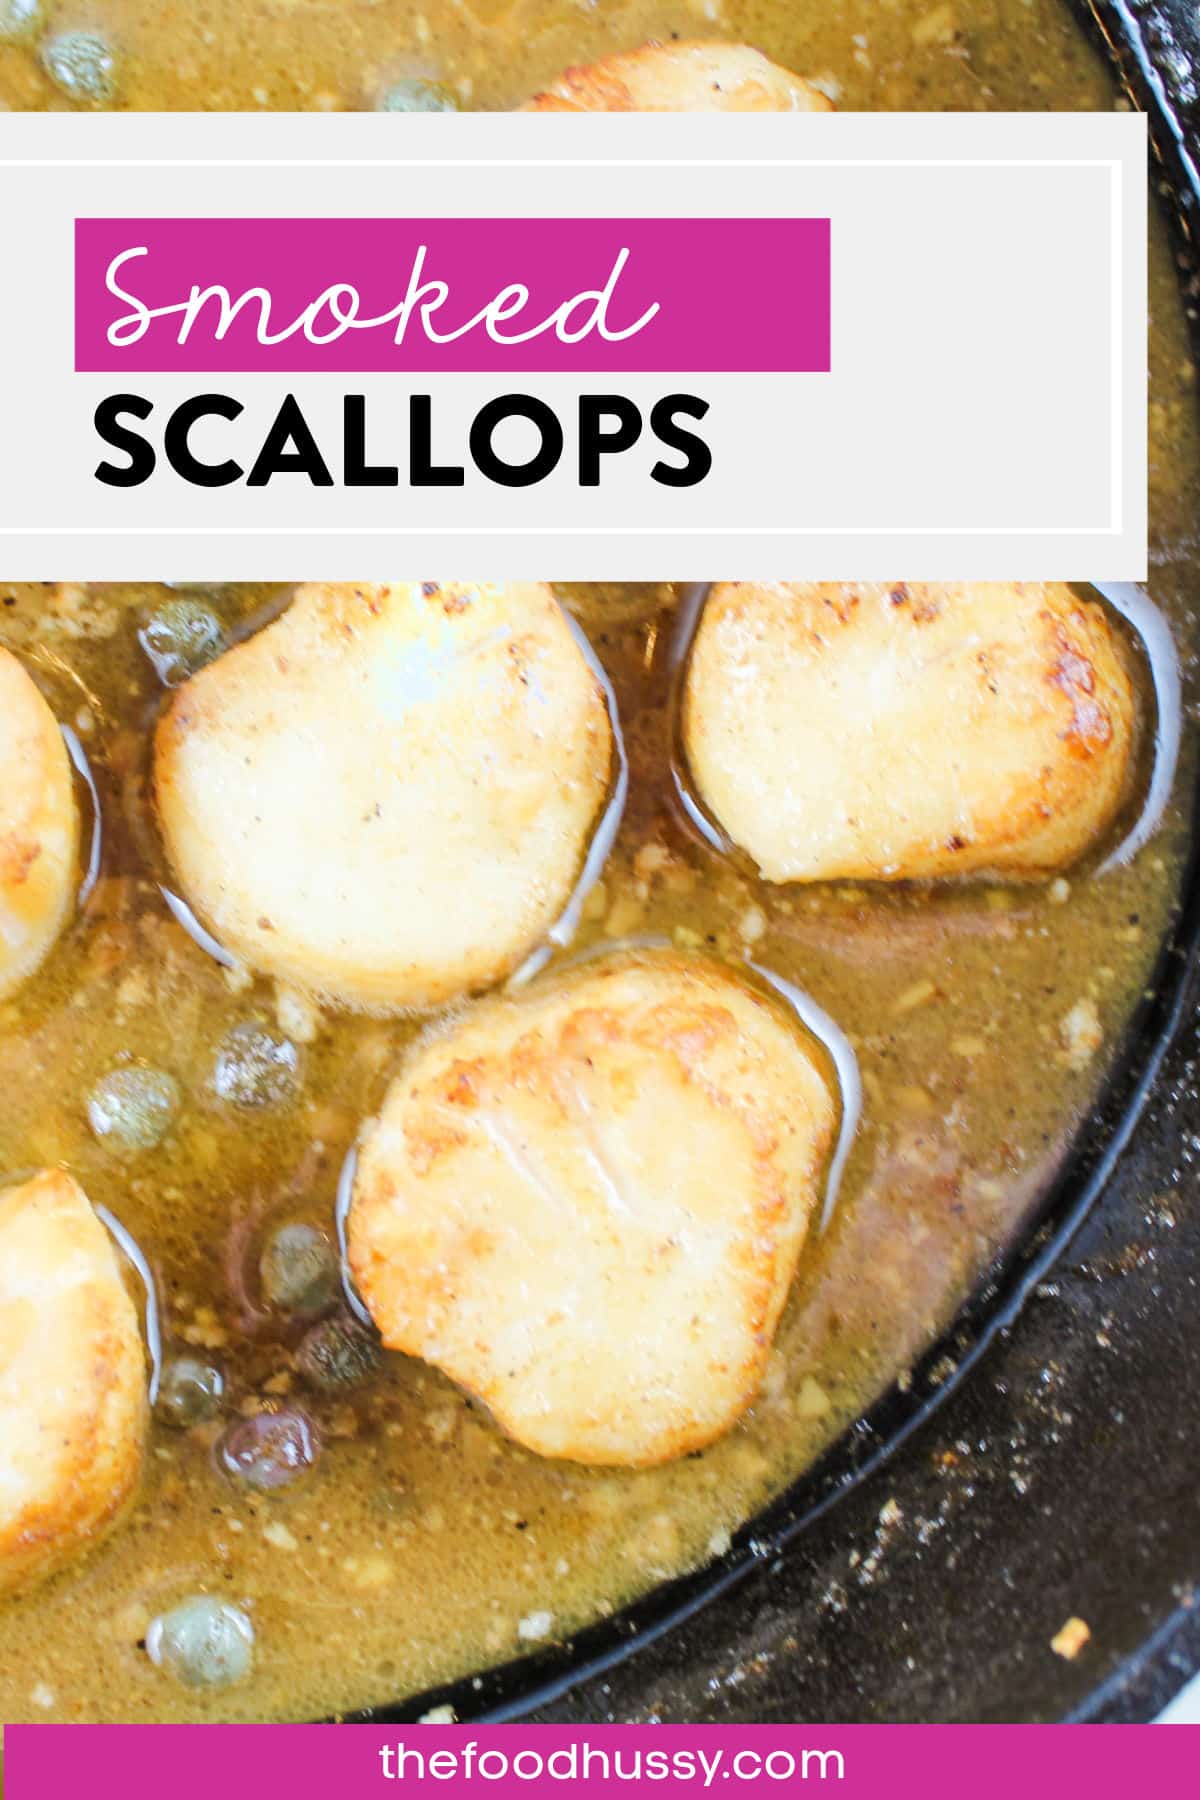 Get that Traeger going and put these Smoked Scallops on the menu for a delicious appetizer or main dish that everybody will be raving about! Lightly seasoned and swimming in a garlic lemon butter sauce - these smoked scallops are a scrumptious! via @foodhussy